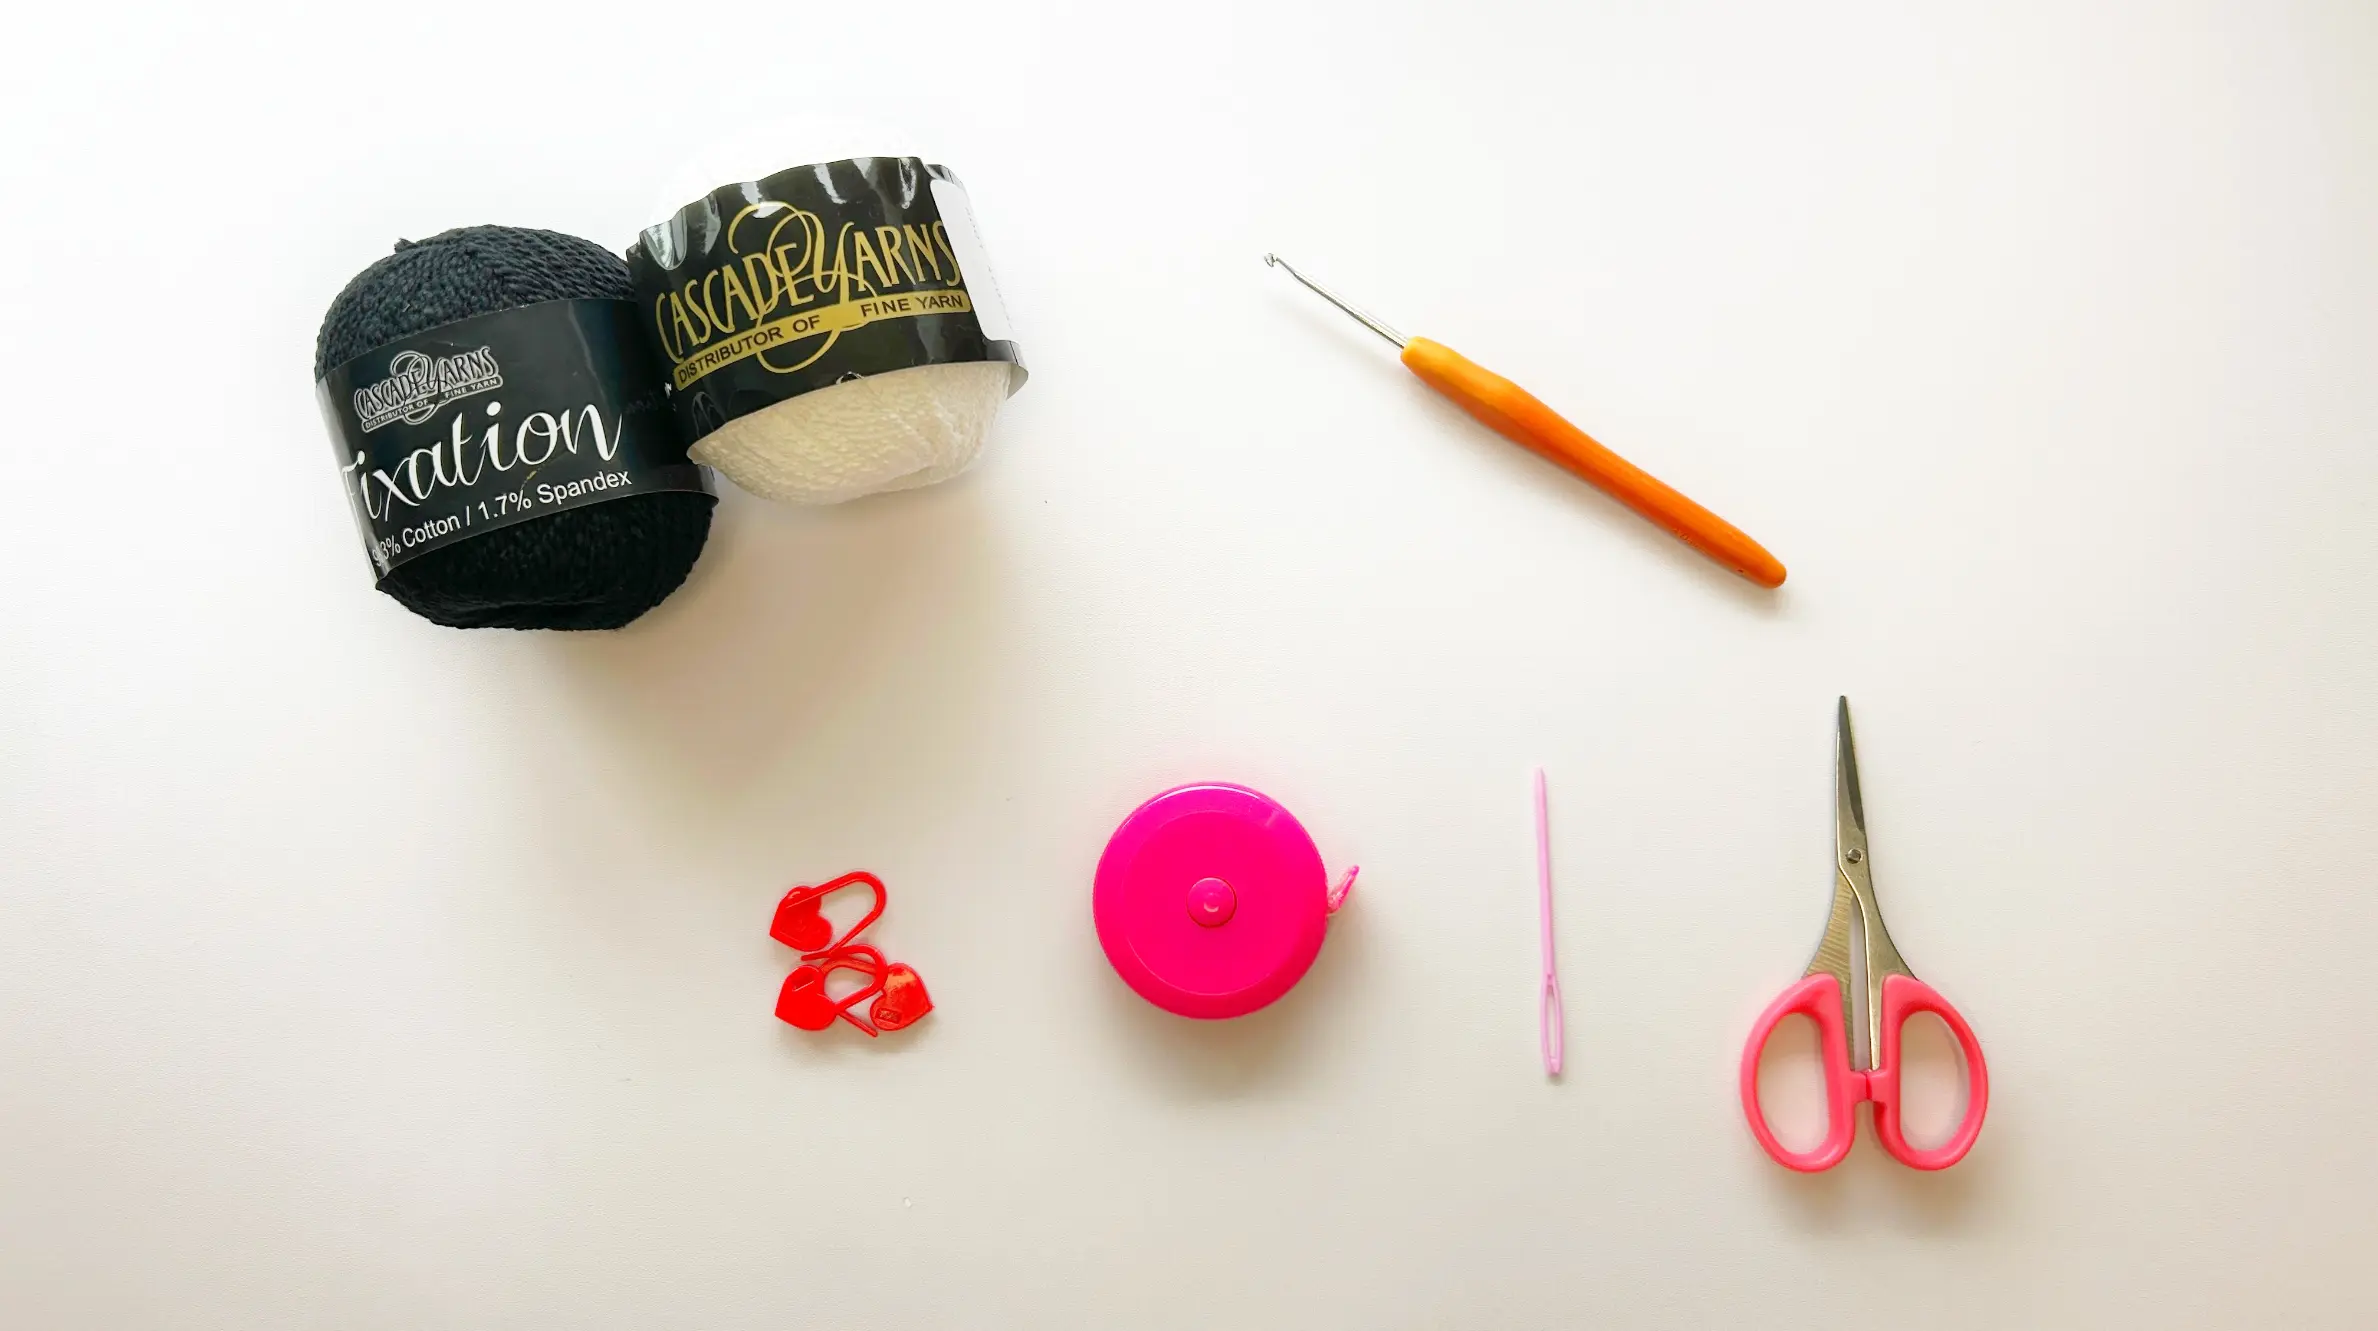 crochet penelope bralette tools and materials